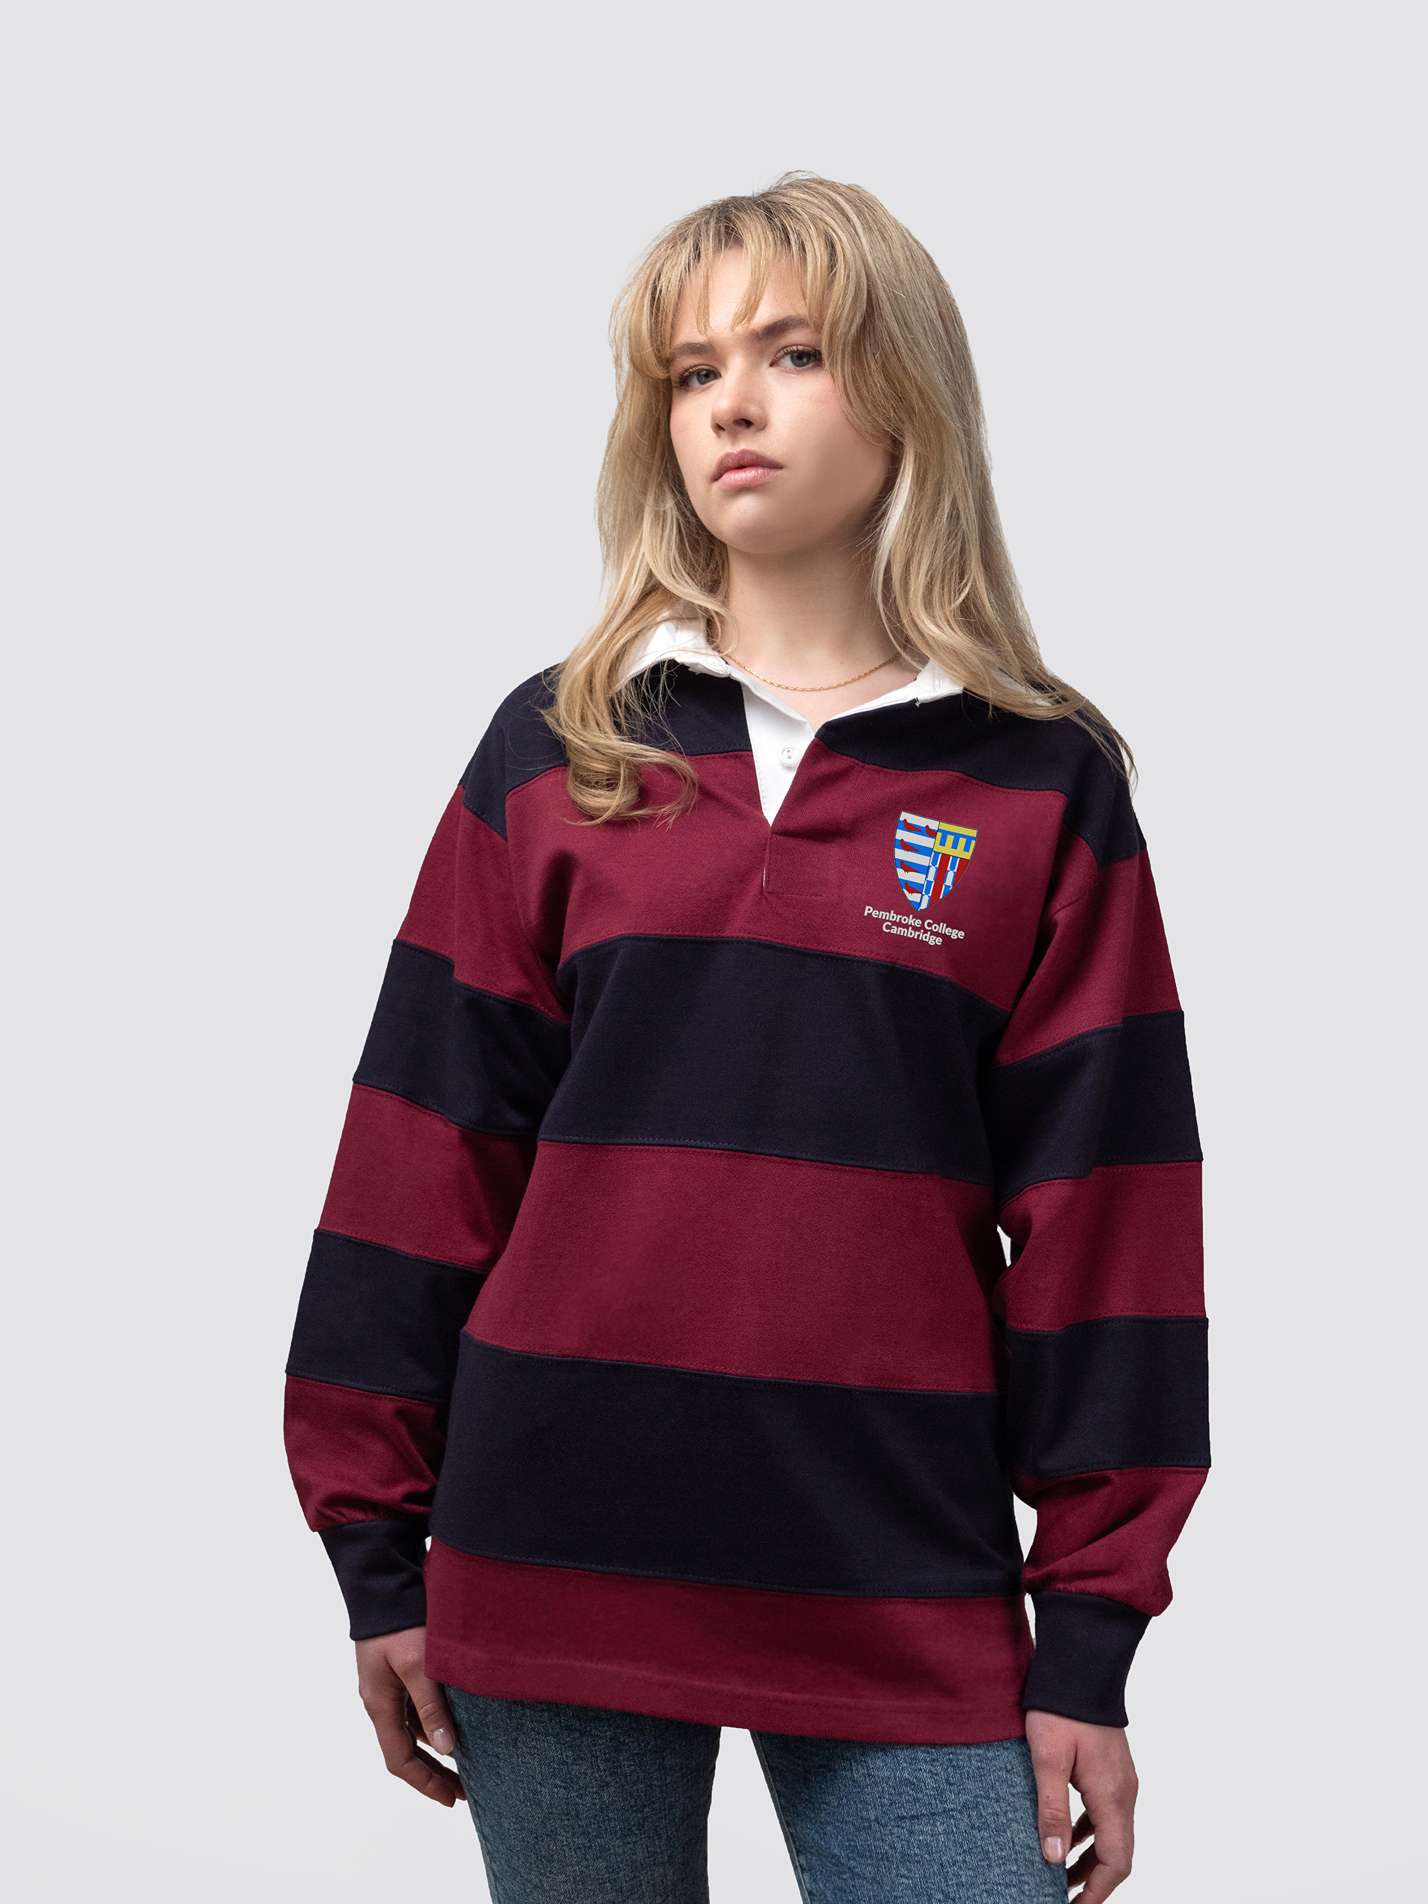 Pembroke College rugby shirt, with burgundy and navy stripes